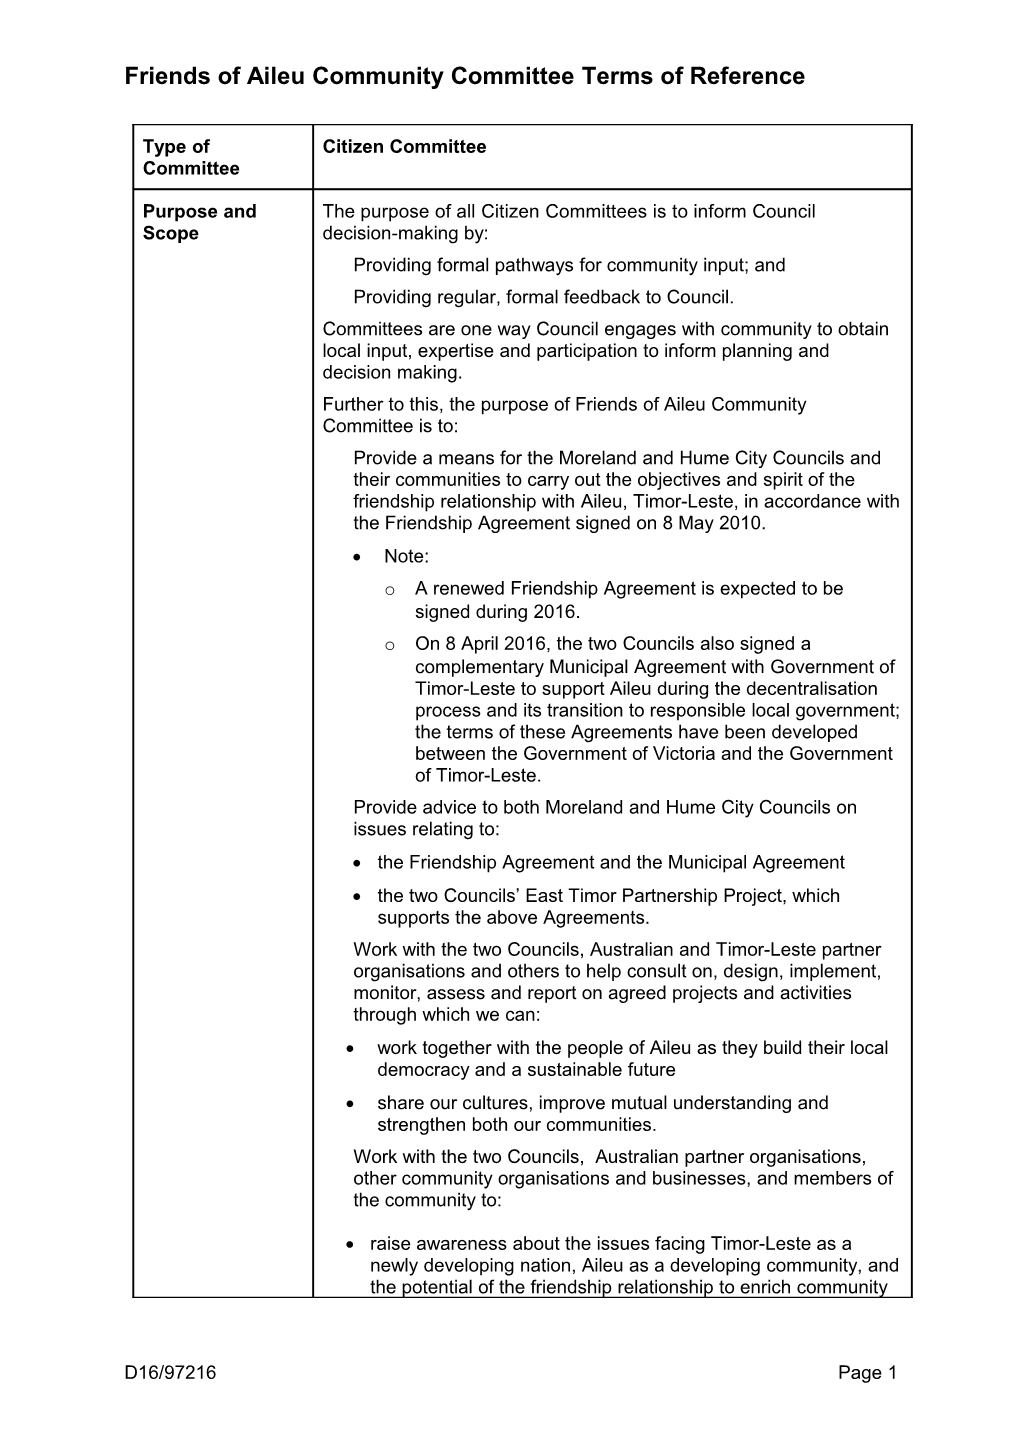 BESS Governance Board Terms of Reference 2014